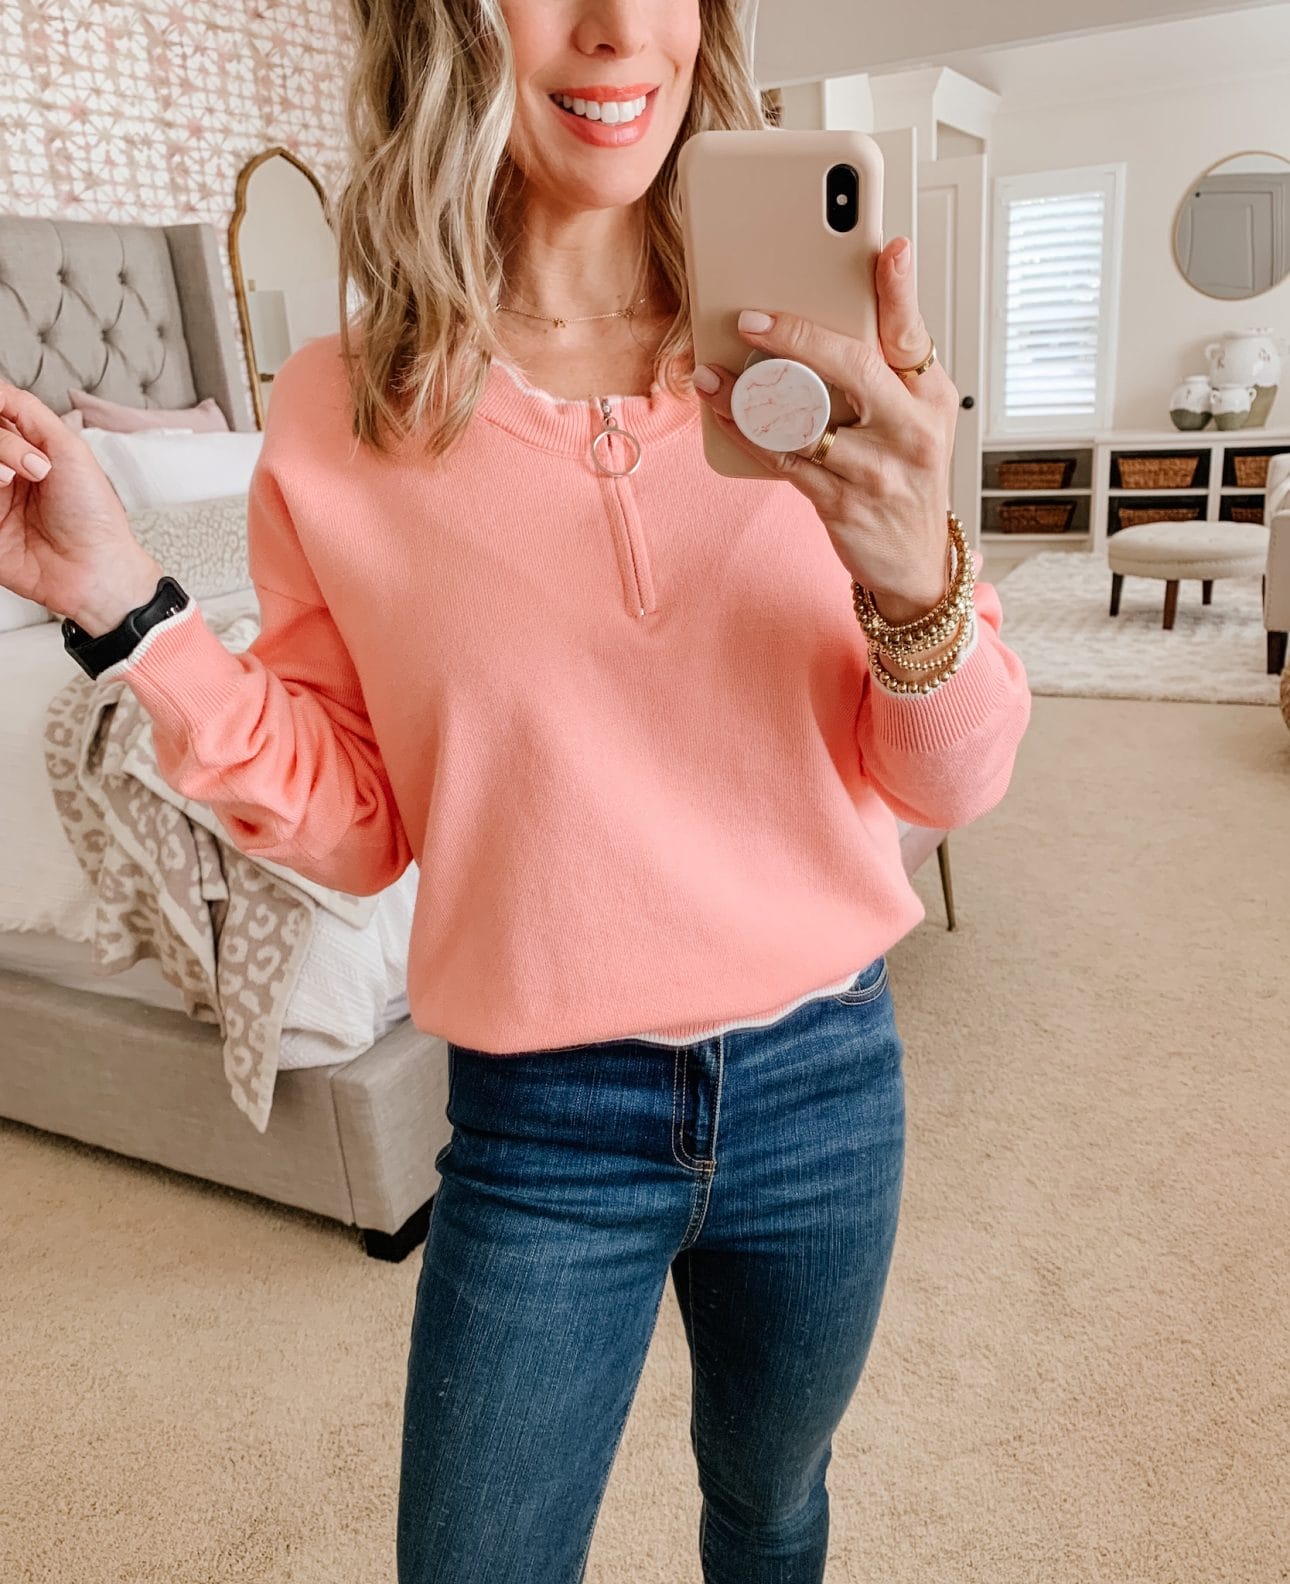 Amazon Fashion, Scalloped Sweater, Jeans, Booties 